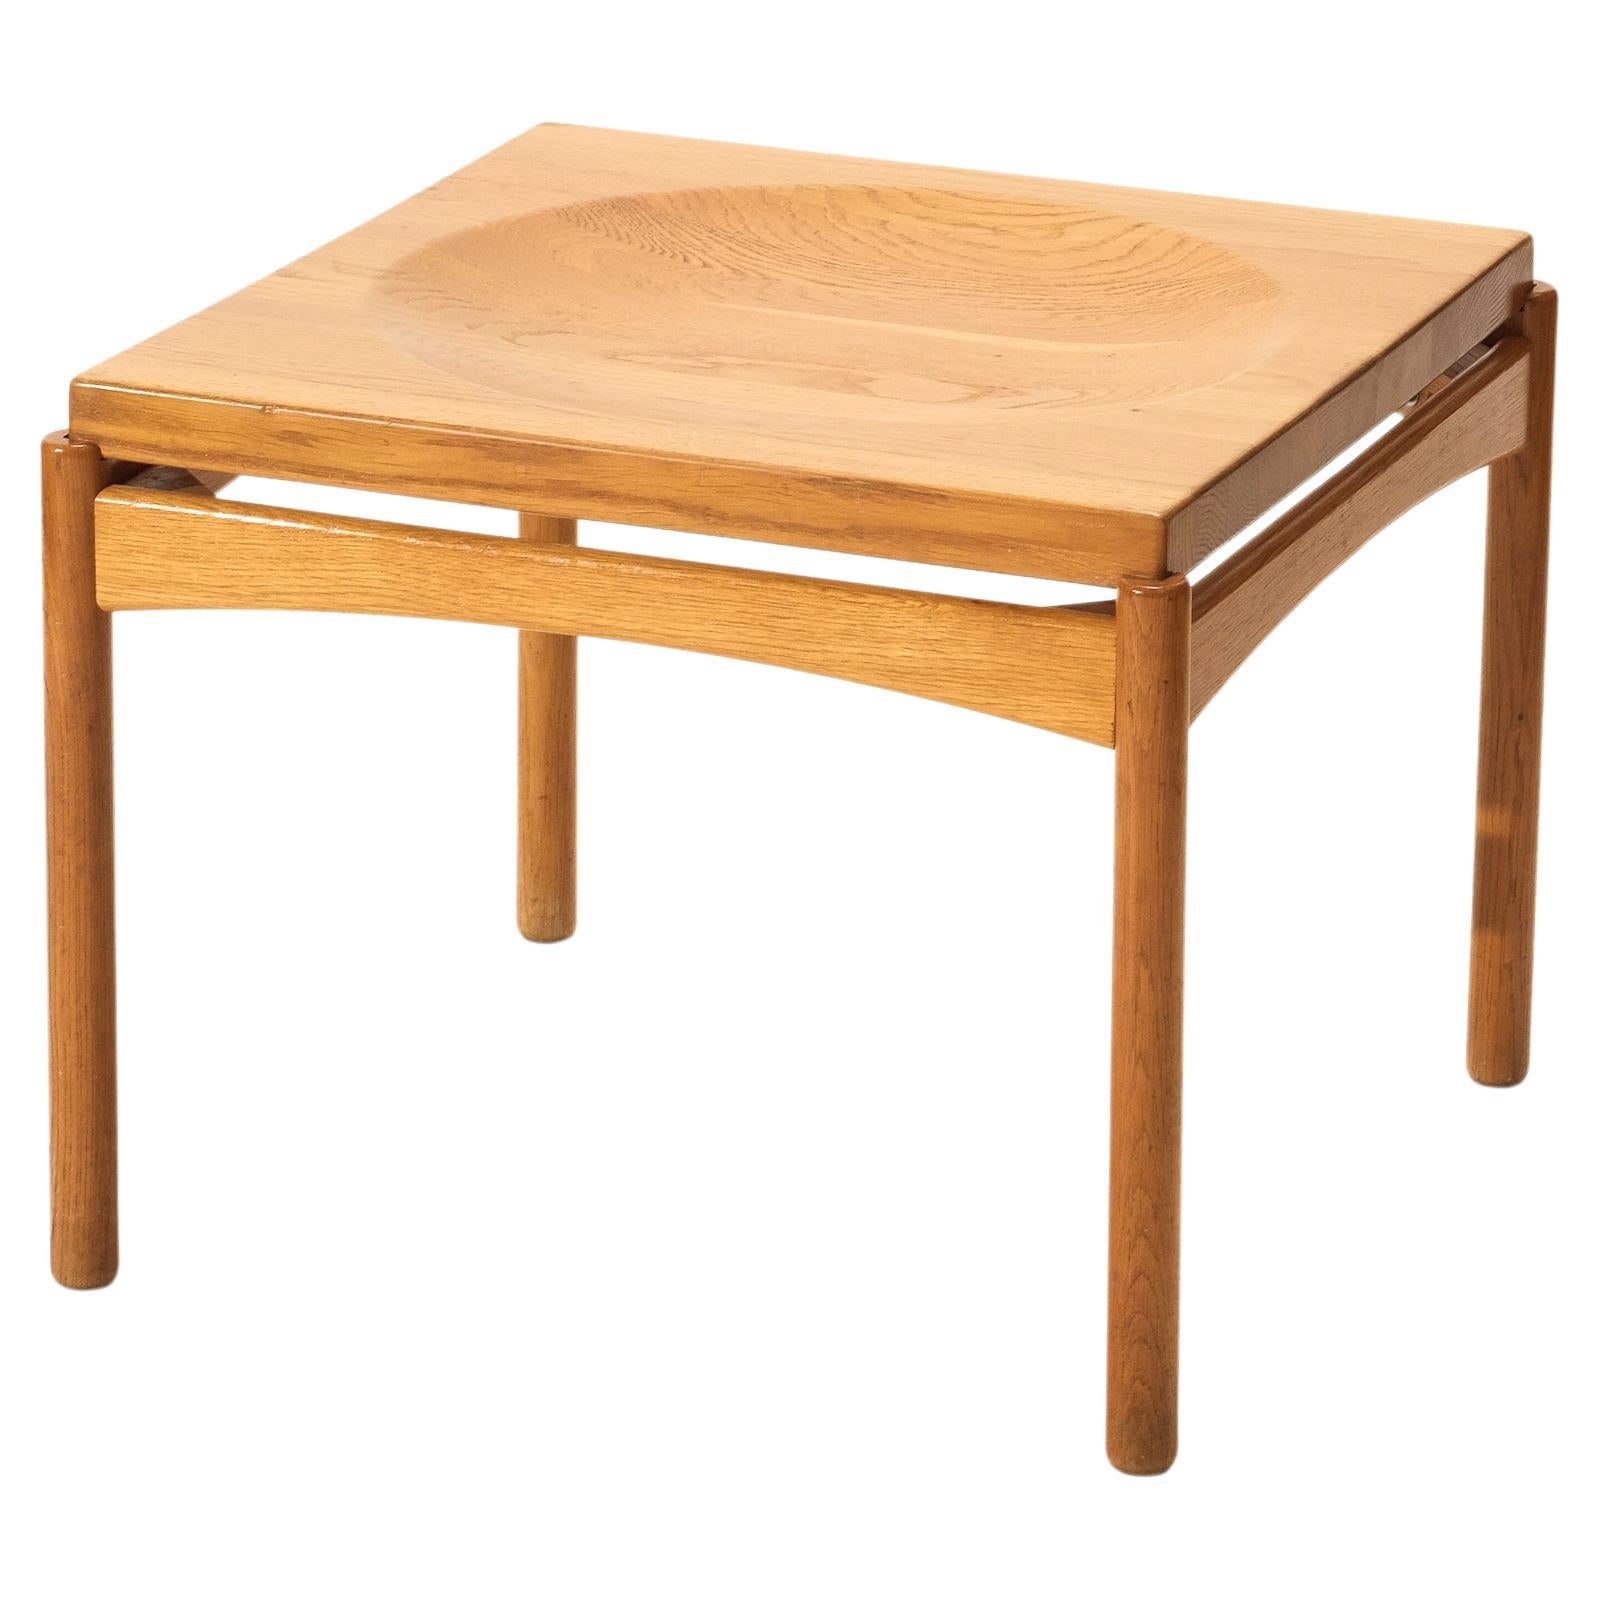 Solid Oak Coffee/Tray Table by Gunnar Myrstrand for Källemo, Sweden, 1960s For Sale